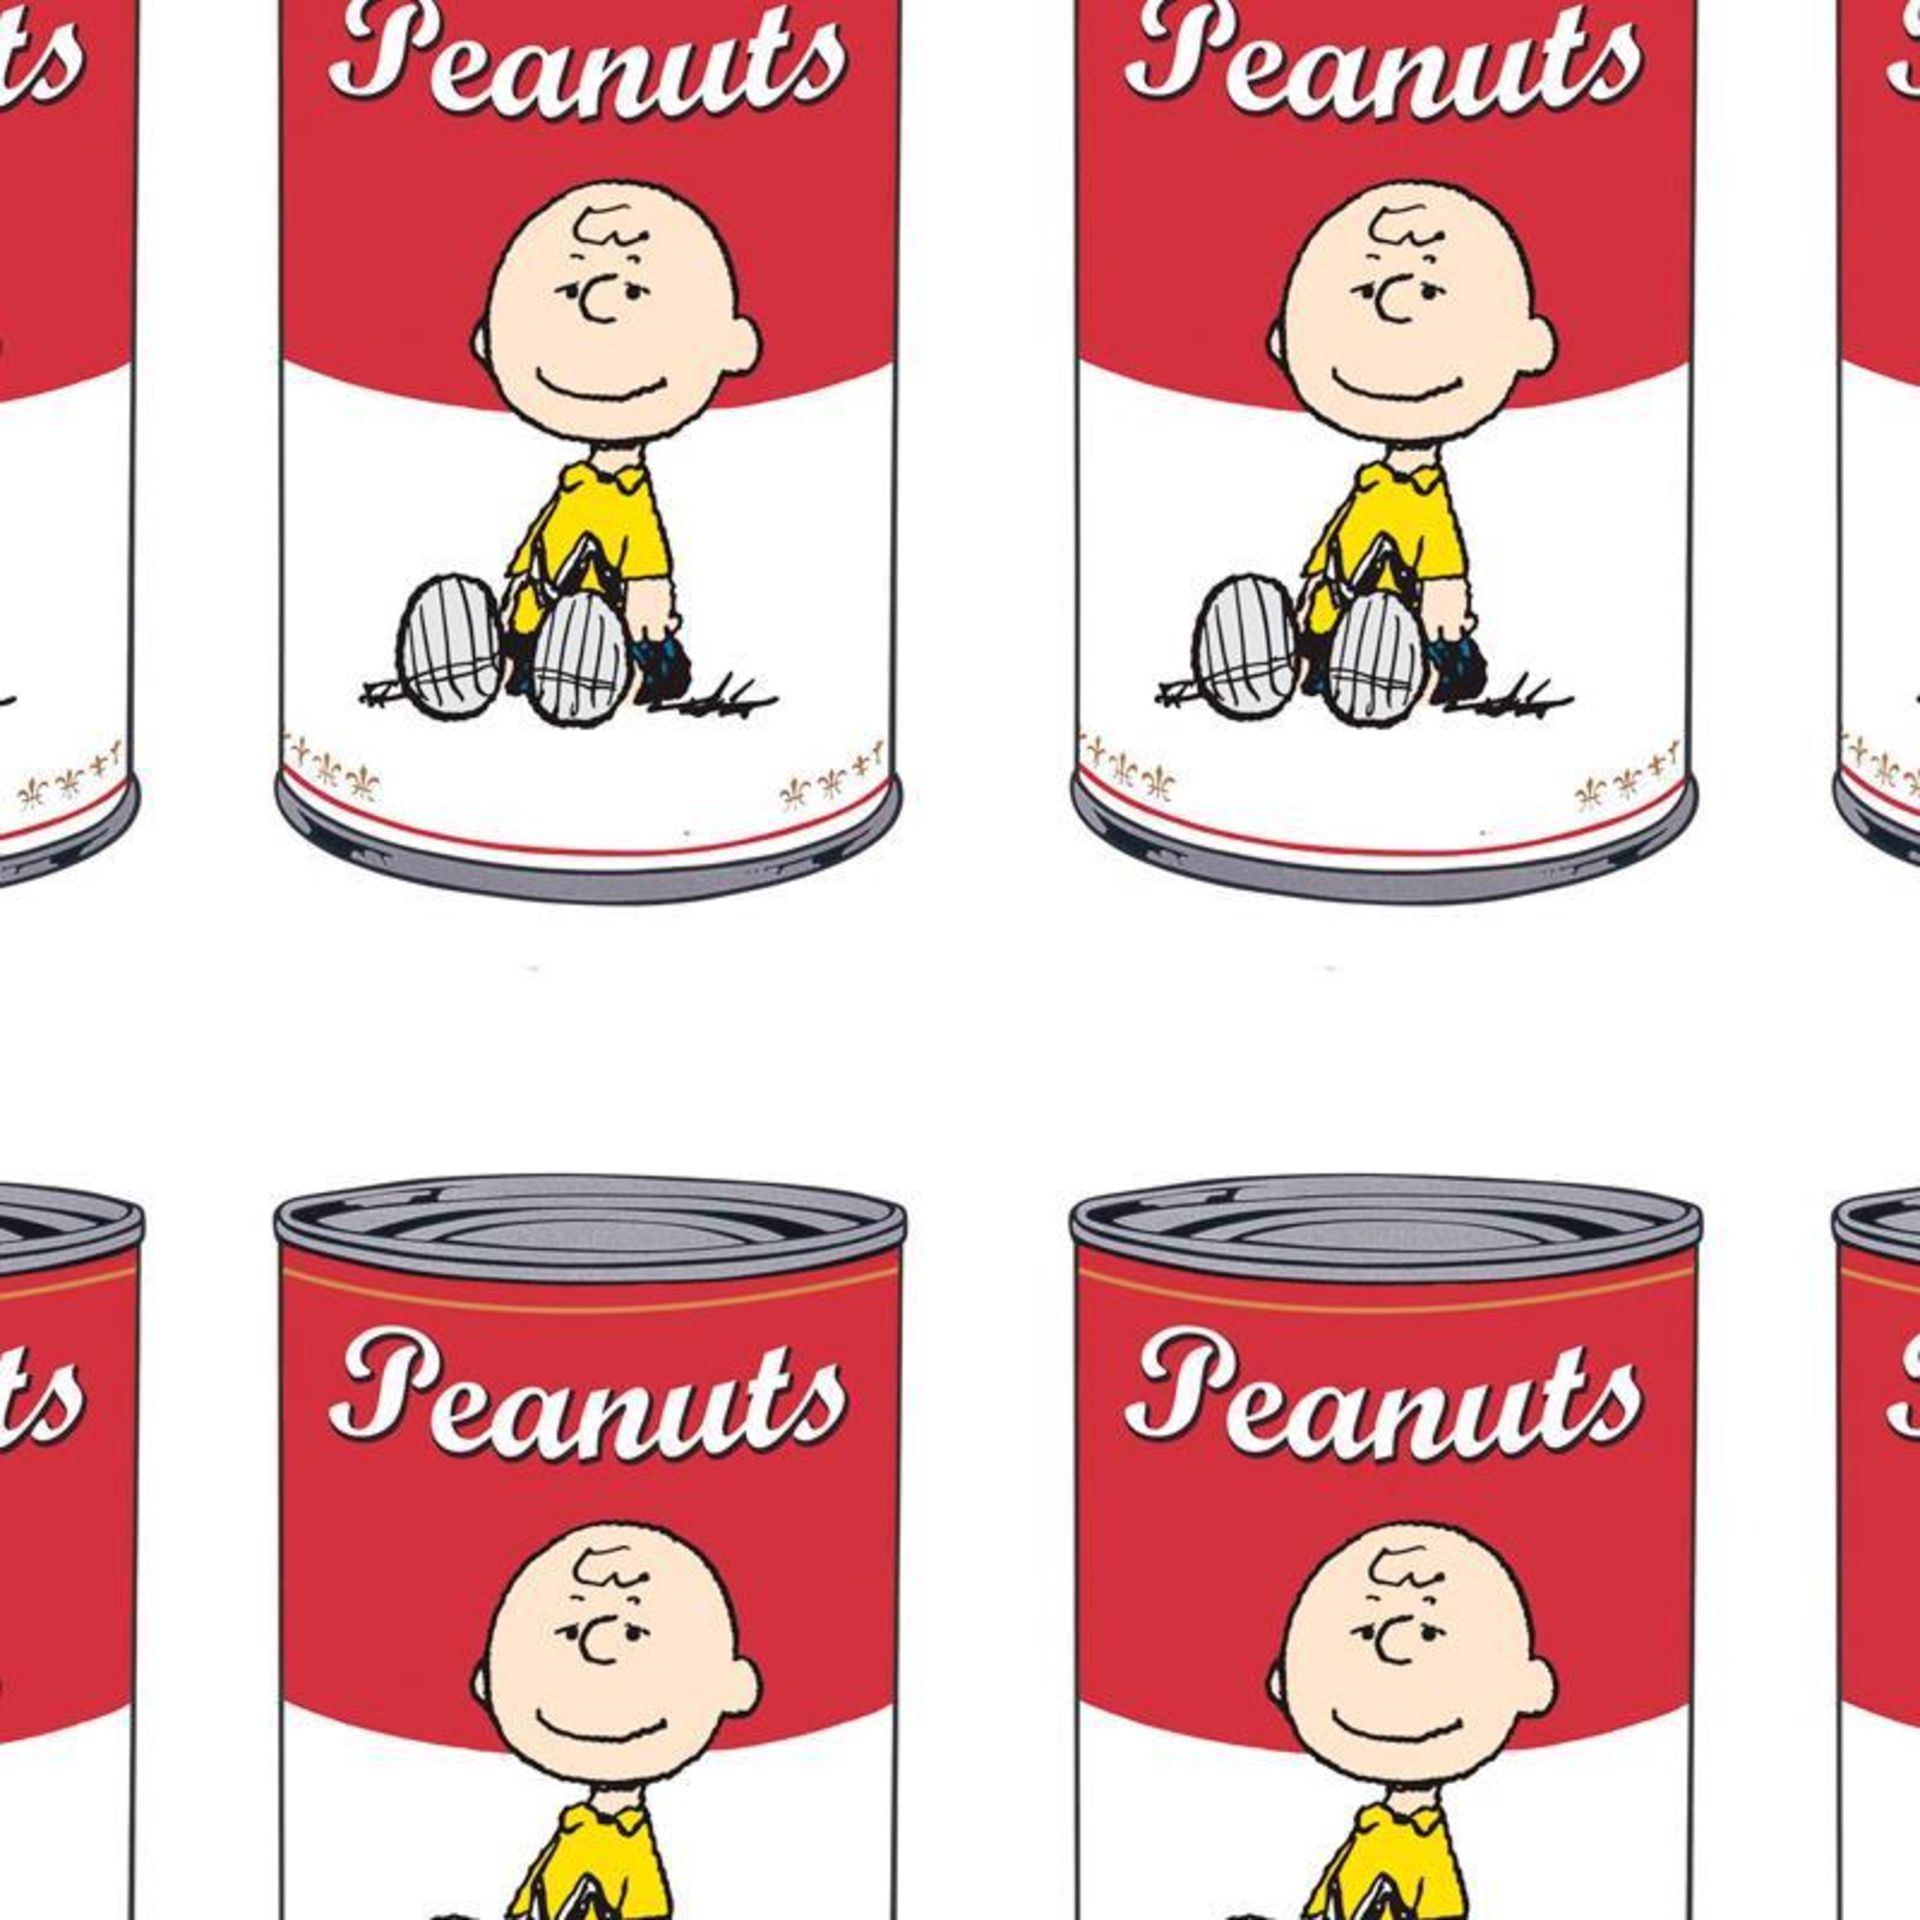 Peanuts Can by Peanuts - Image 2 of 2